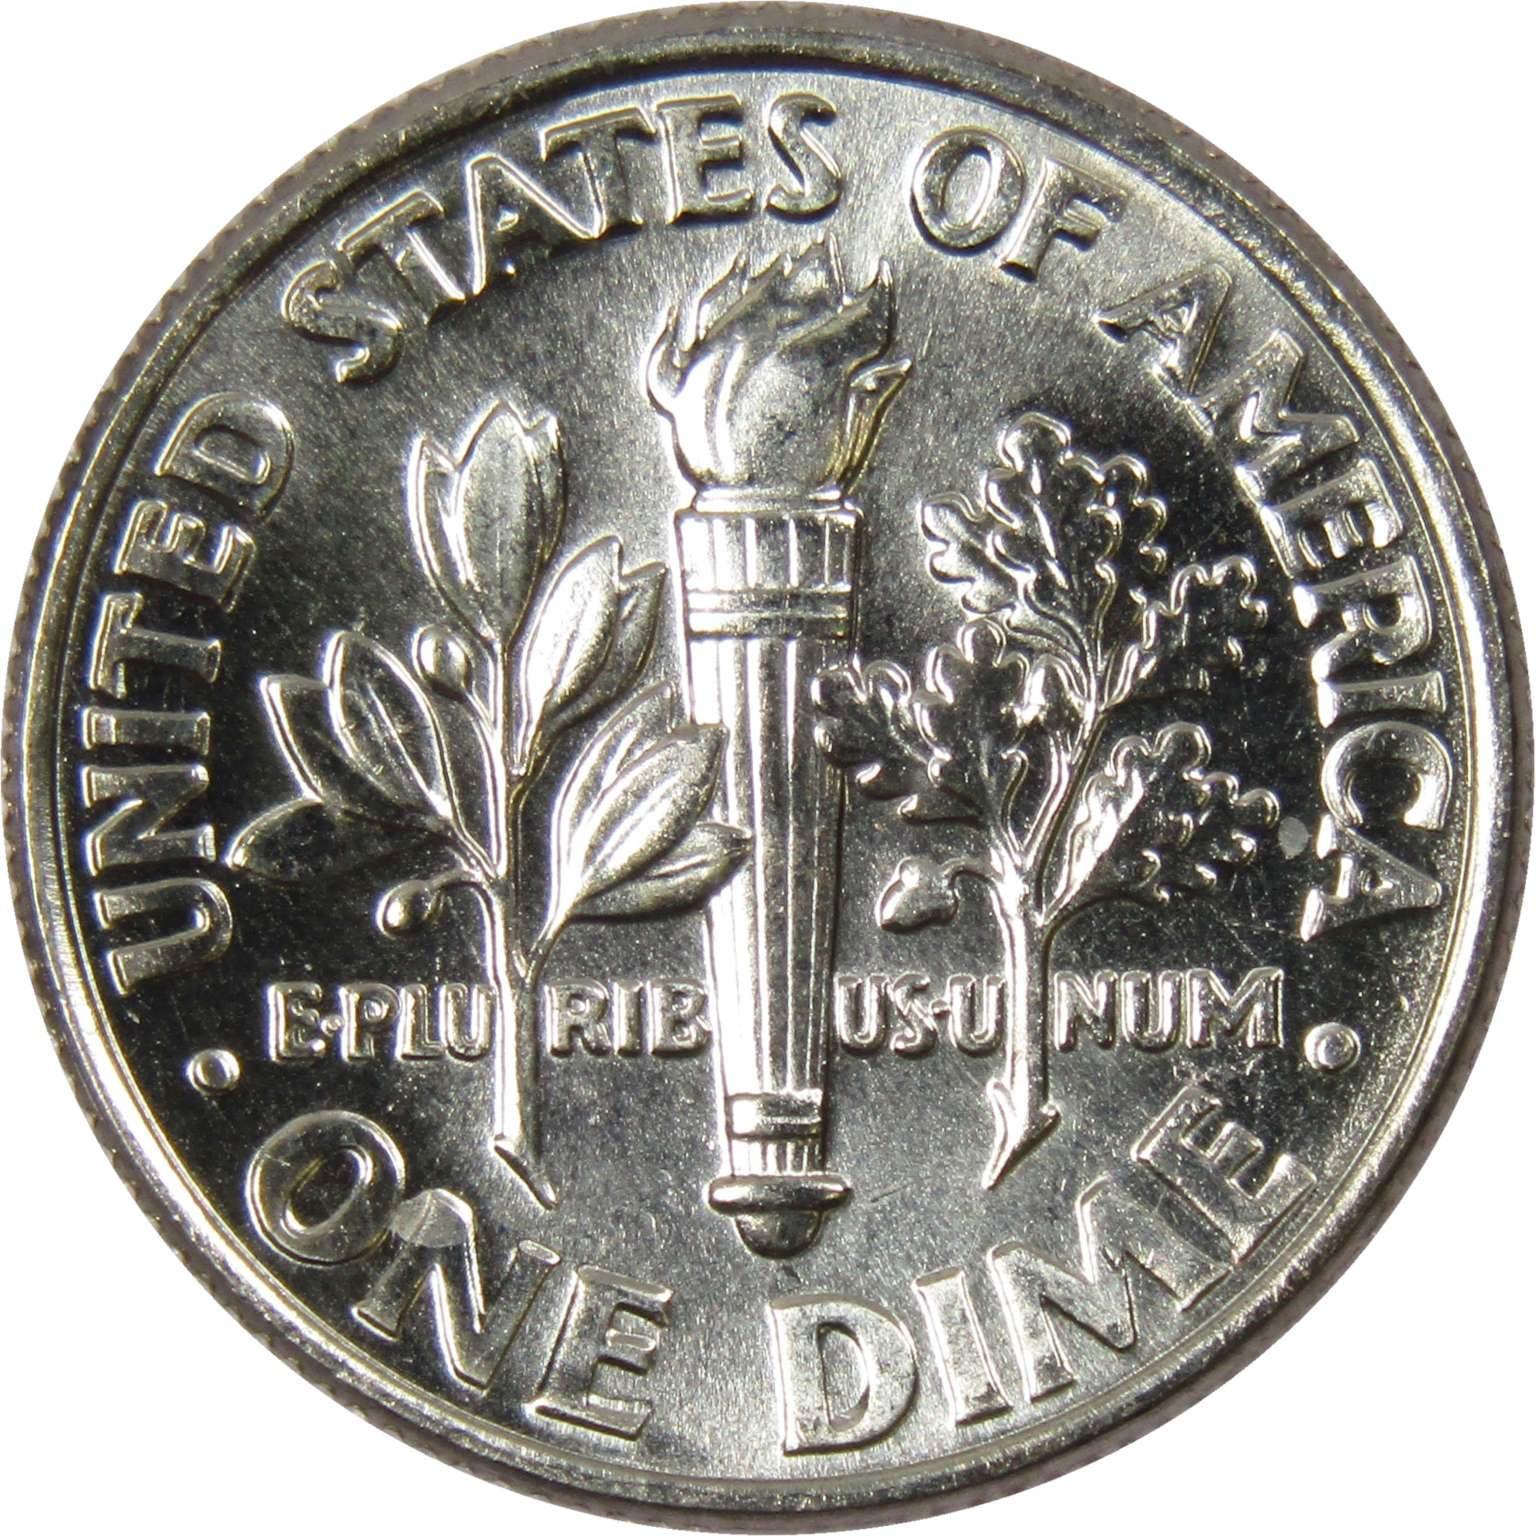 2000 D Roosevelt Dime BU Uncirculated Mint State 10c US Coin Collectible